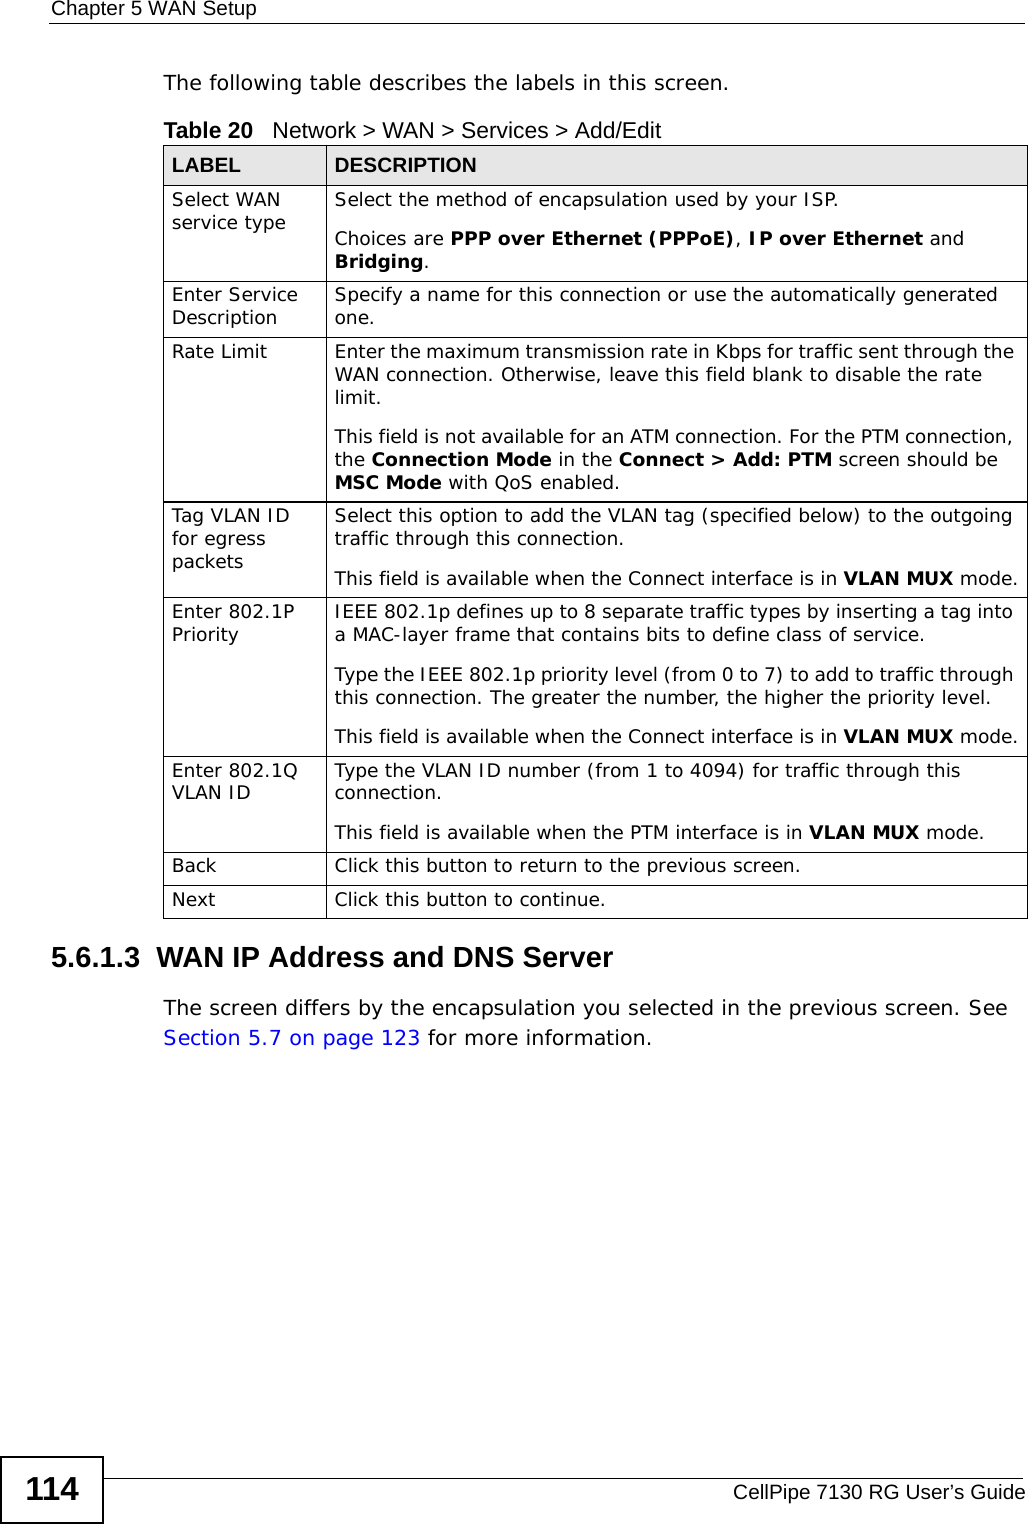 Chapter 5 WAN SetupCellPipe 7130 RG User’s Guide114The following table describes the labels in this screen.  5.6.1.3  WAN IP Address and DNS ServerThe screen differs by the encapsulation you selected in the previous screen. See Section 5.7 on page 123 for more information. Table 20   Network &gt; WAN &gt; Services &gt; Add/EditLABEL DESCRIPTIONSelect WAN service type Select the method of encapsulation used by your ISP. Choices are PPP over Ethernet (PPPoE), IP over Ethernet and Bridging.Enter Service Description Specify a name for this connection or use the automatically generated one.Rate Limit Enter the maximum transmission rate in Kbps for traffic sent through the WAN connection. Otherwise, leave this field blank to disable the rate limit.This field is not available for an ATM connection. For the PTM connection, the Connection Mode in the Connect &gt; Add: PTM screen should be MSC Mode with QoS enabled.Tag VLAN ID for egress packets Select this option to add the VLAN tag (specified below) to the outgoing traffic through this connection.This field is available when the Connect interface is in VLAN MUX mode.Enter 802.1P Priority IEEE 802.1p defines up to 8 separate traffic types by inserting a tag into a MAC-layer frame that contains bits to define class of service. Type the IEEE 802.1p priority level (from 0 to 7) to add to traffic through this connection. The greater the number, the higher the priority level.This field is available when the Connect interface is in VLAN MUX mode.Enter 802.1Q VLAN ID Type the VLAN ID number (from 1 to 4094) for traffic through this connection.This field is available when the PTM interface is in VLAN MUX mode.Back Click this button to return to the previous screen.Next Click this button to continue.